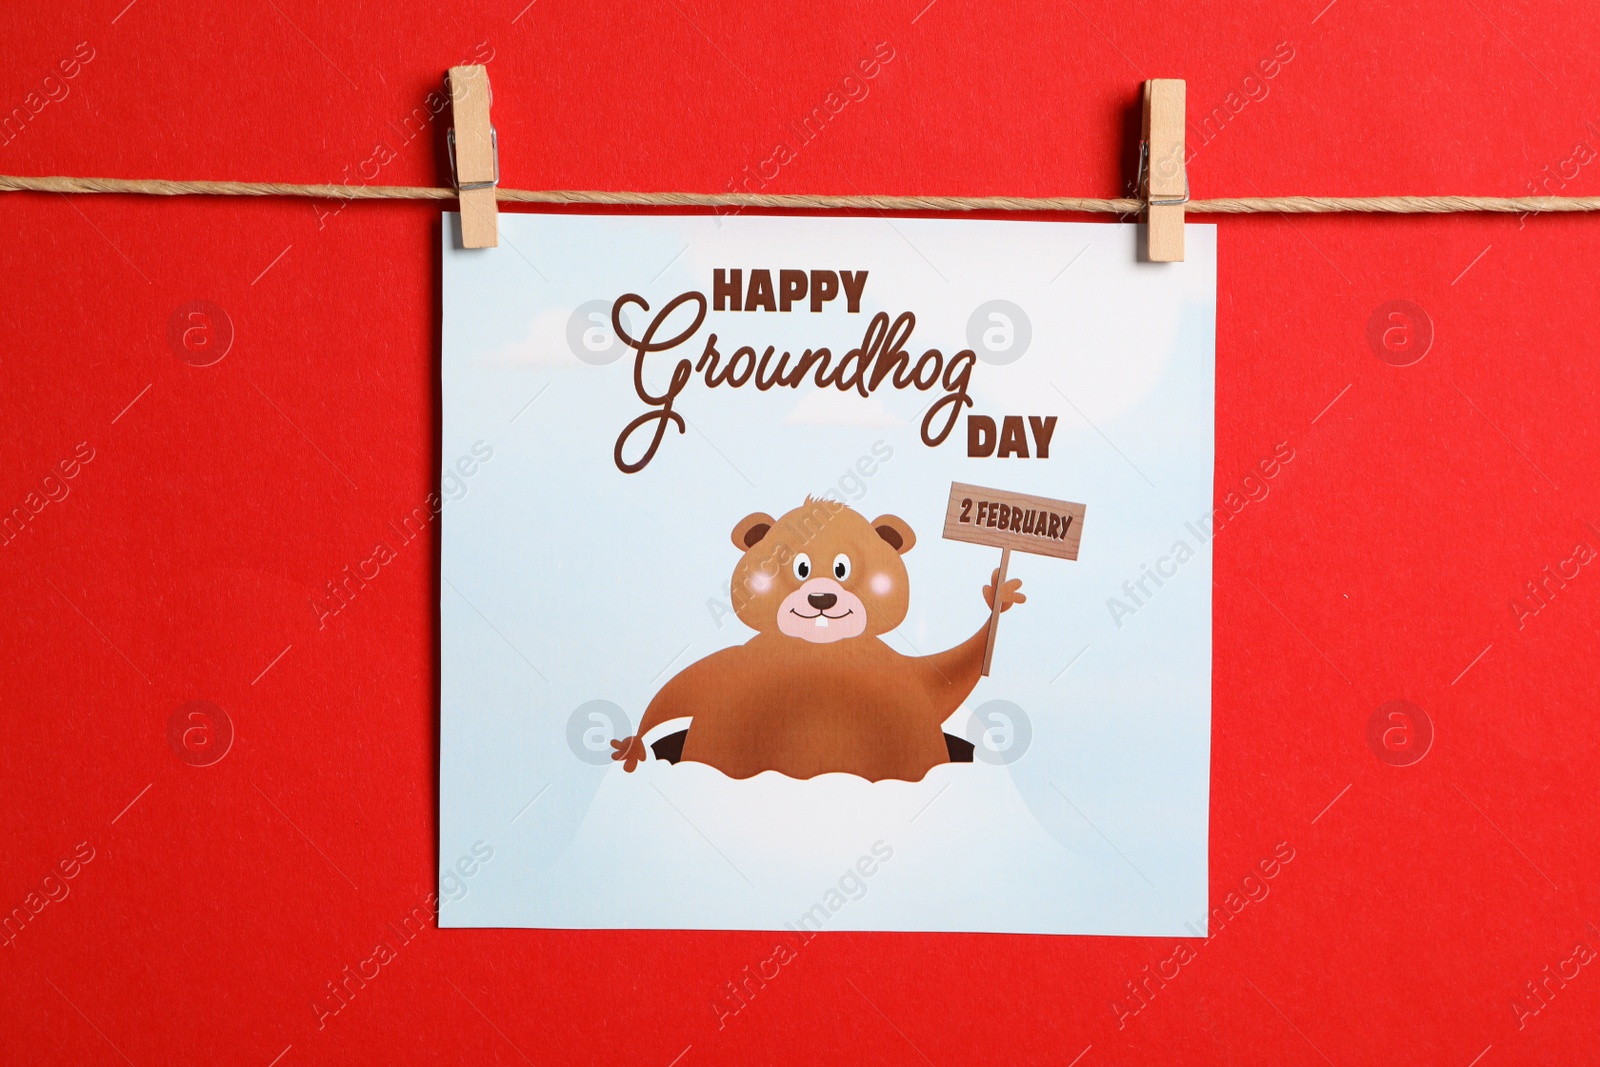 Photo of Happy Groundhog Day greeting card hanging on red background